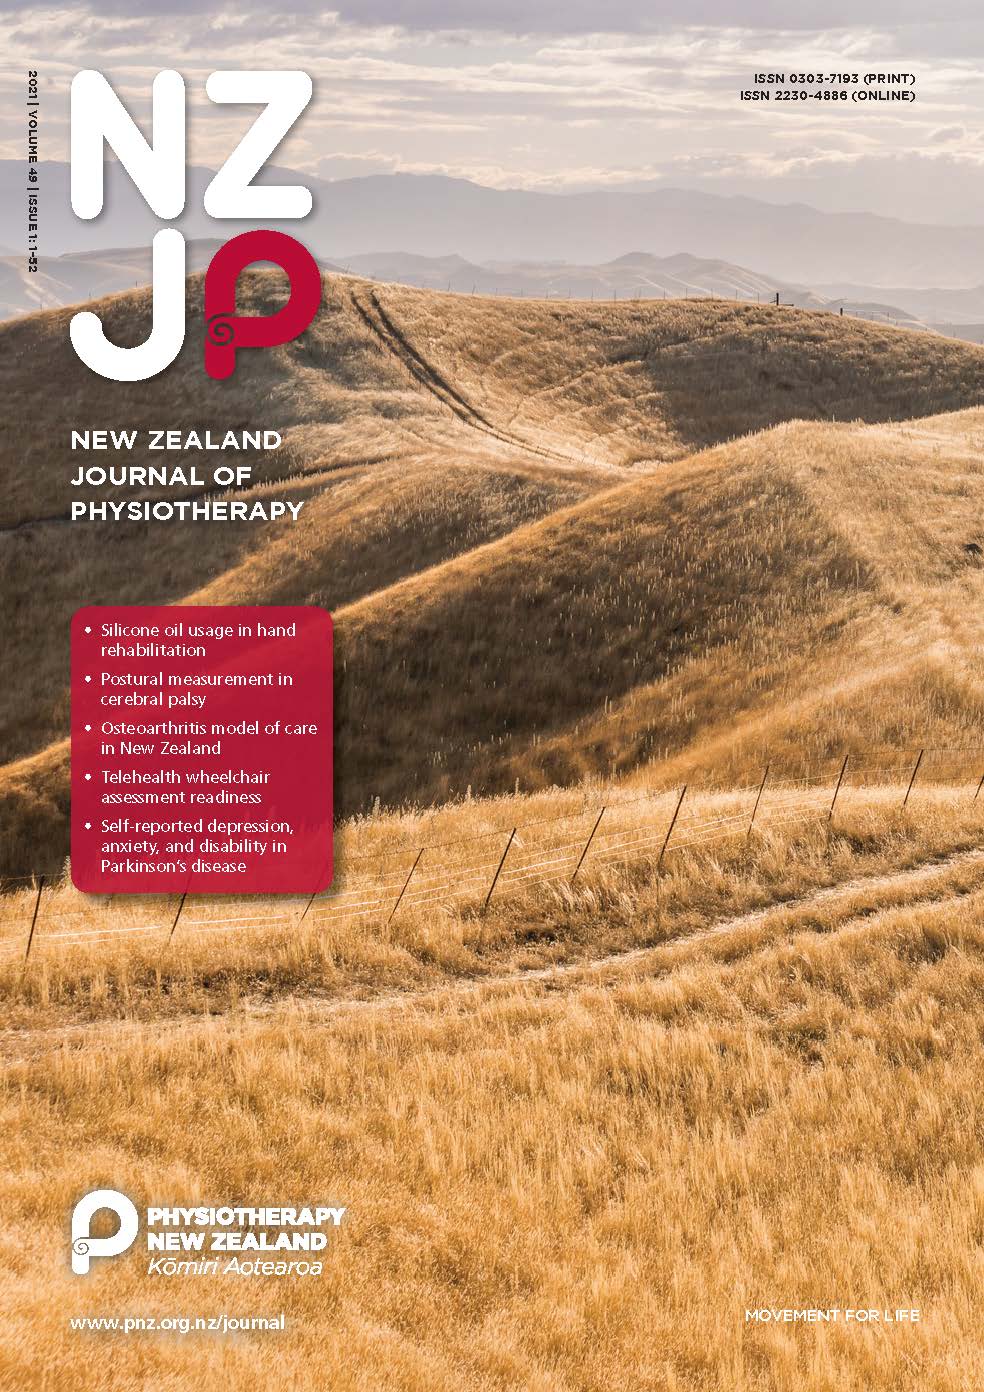 					View Vol. 49 No. 1 (2021): New Zealand Journal of Physiotherapy
				